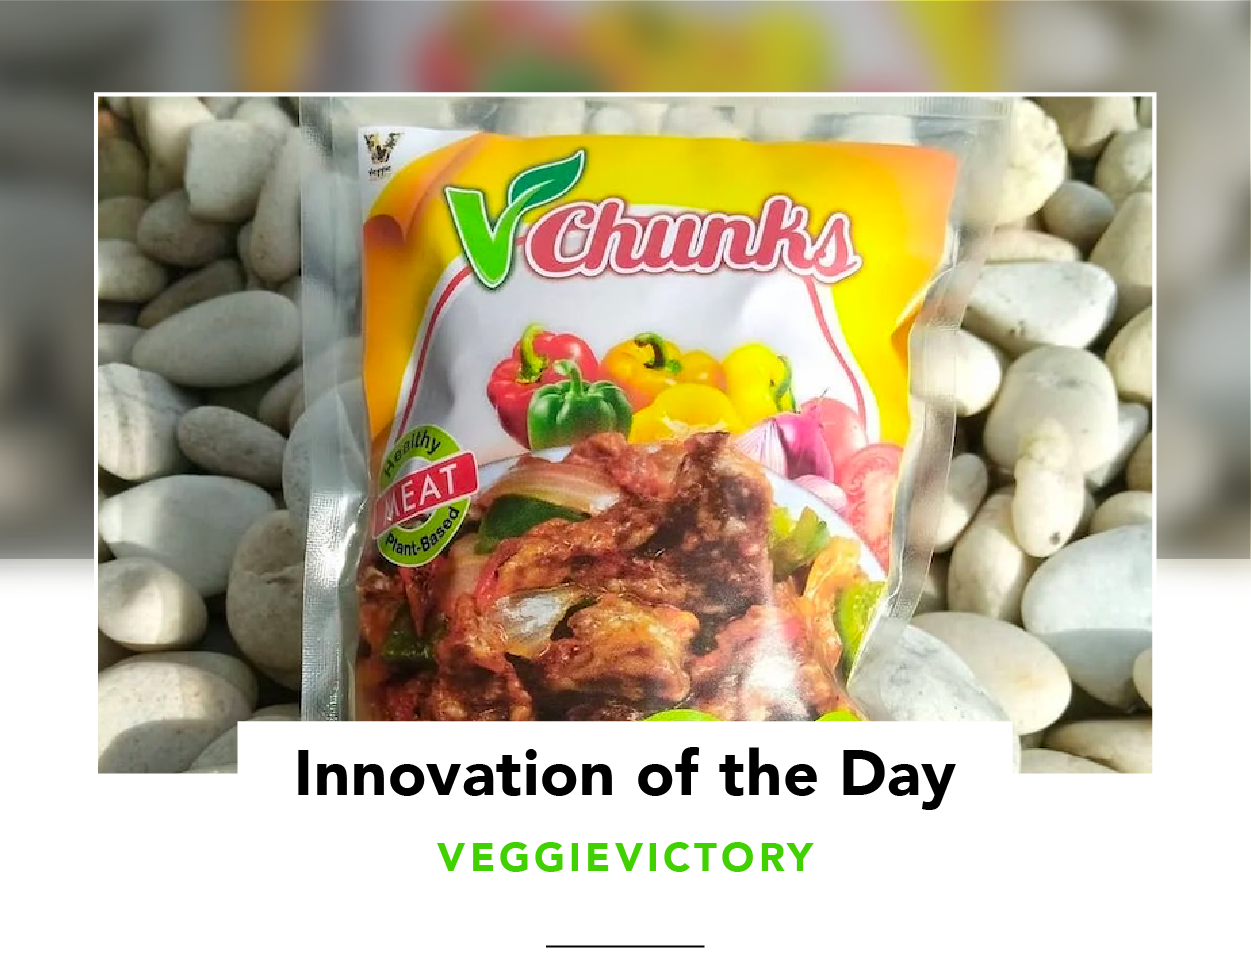 A package of Veggie Victory's Vchunks, on a background of pebbles